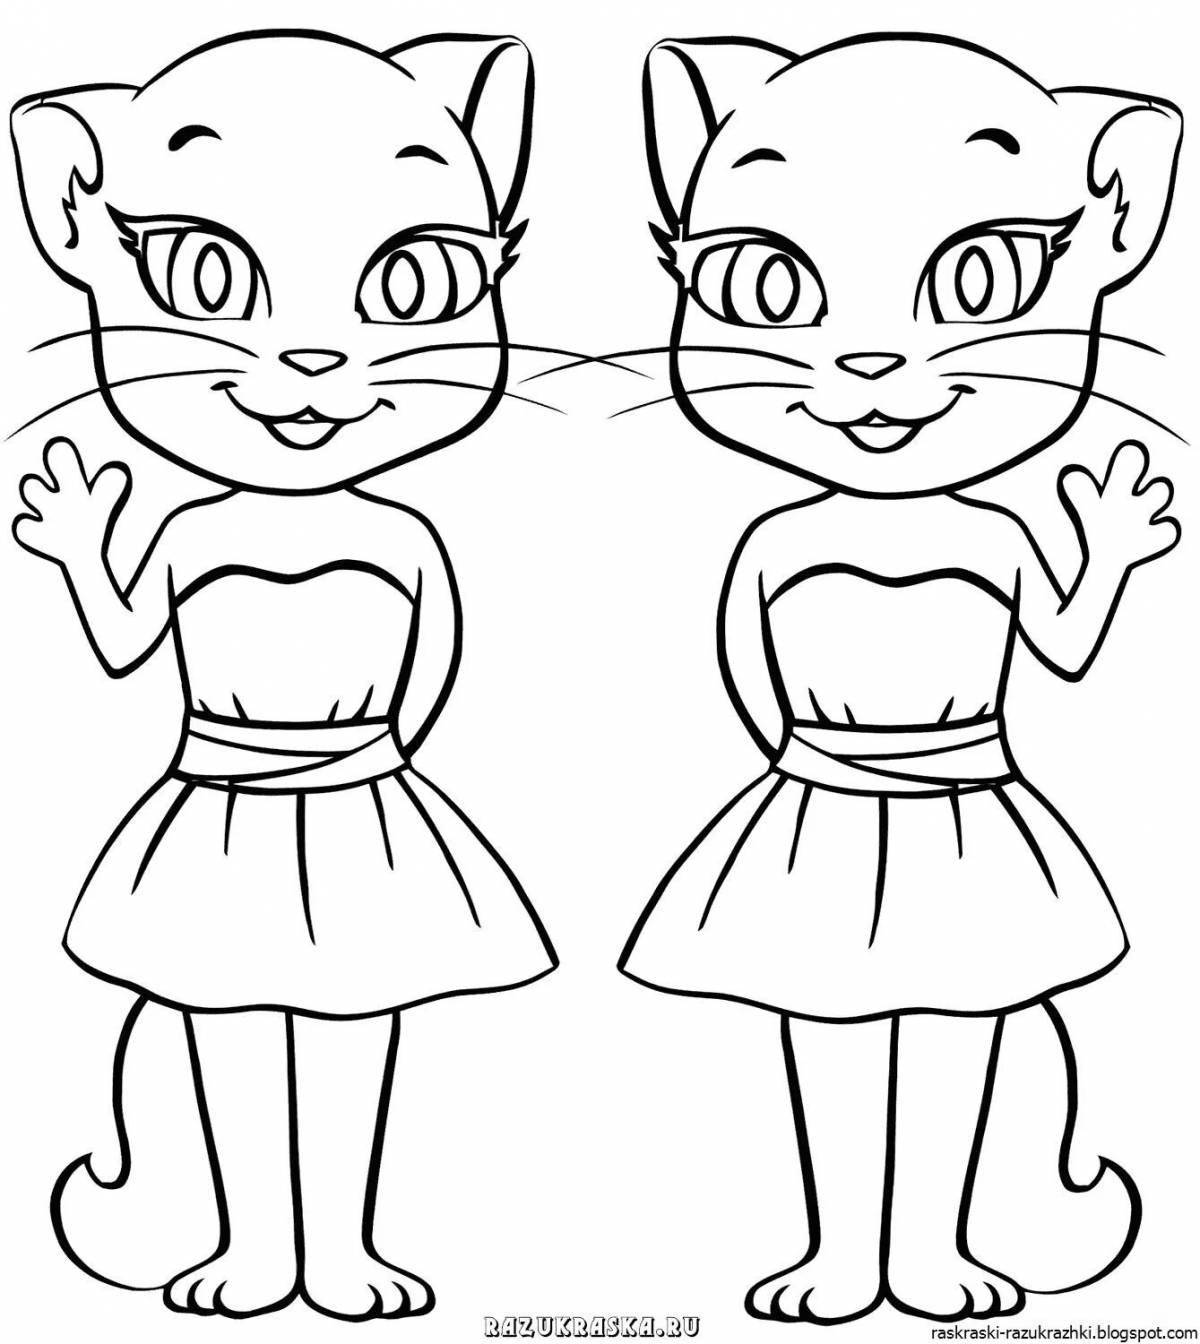 Coloring page adorable cat angela